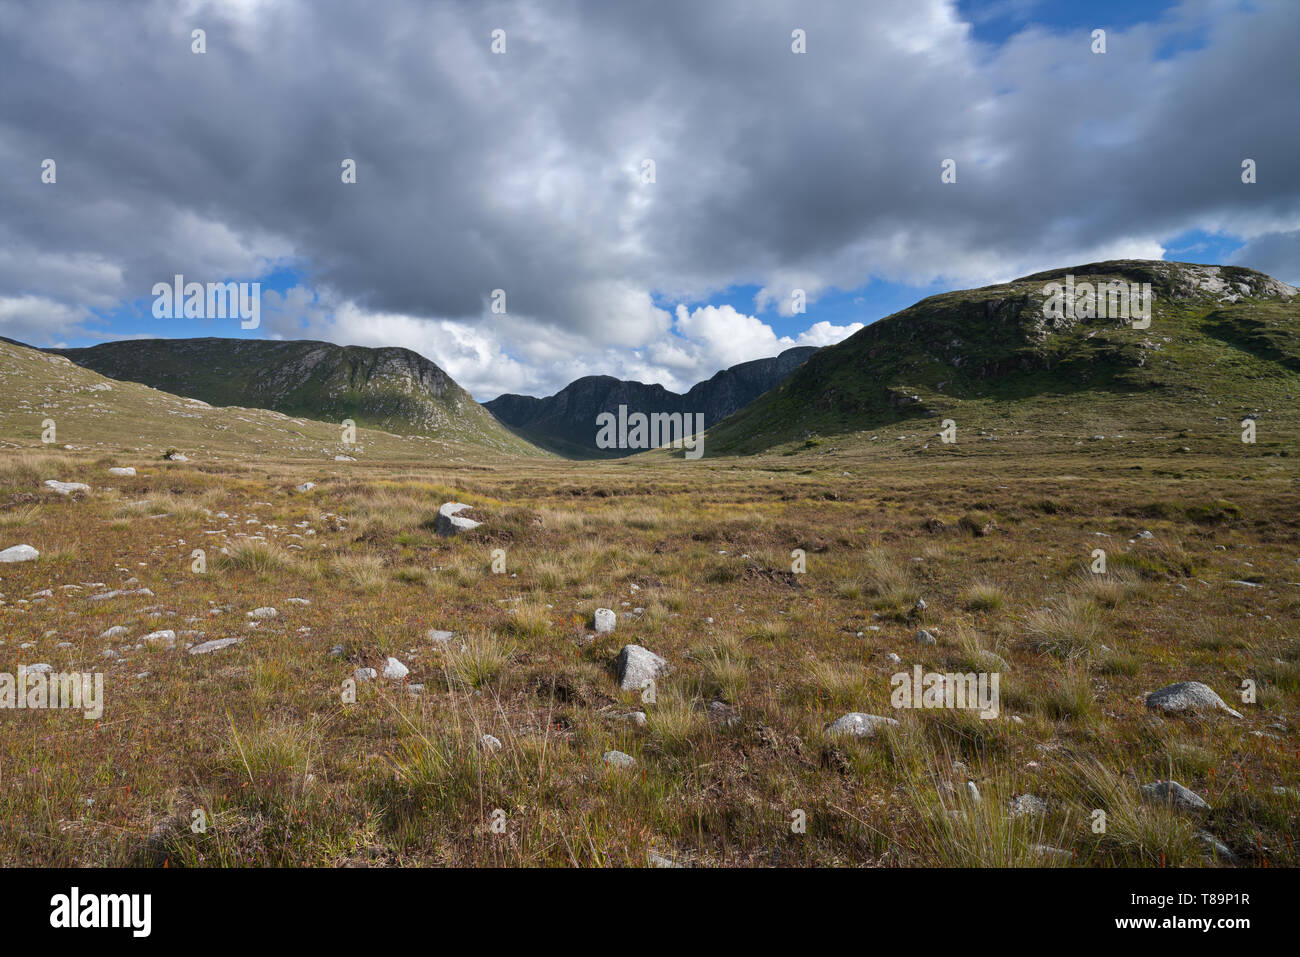 The Poisoned Glen, at the foot of Mount Errigal in Dunlewey, Donegal, Ireland Stock Photo